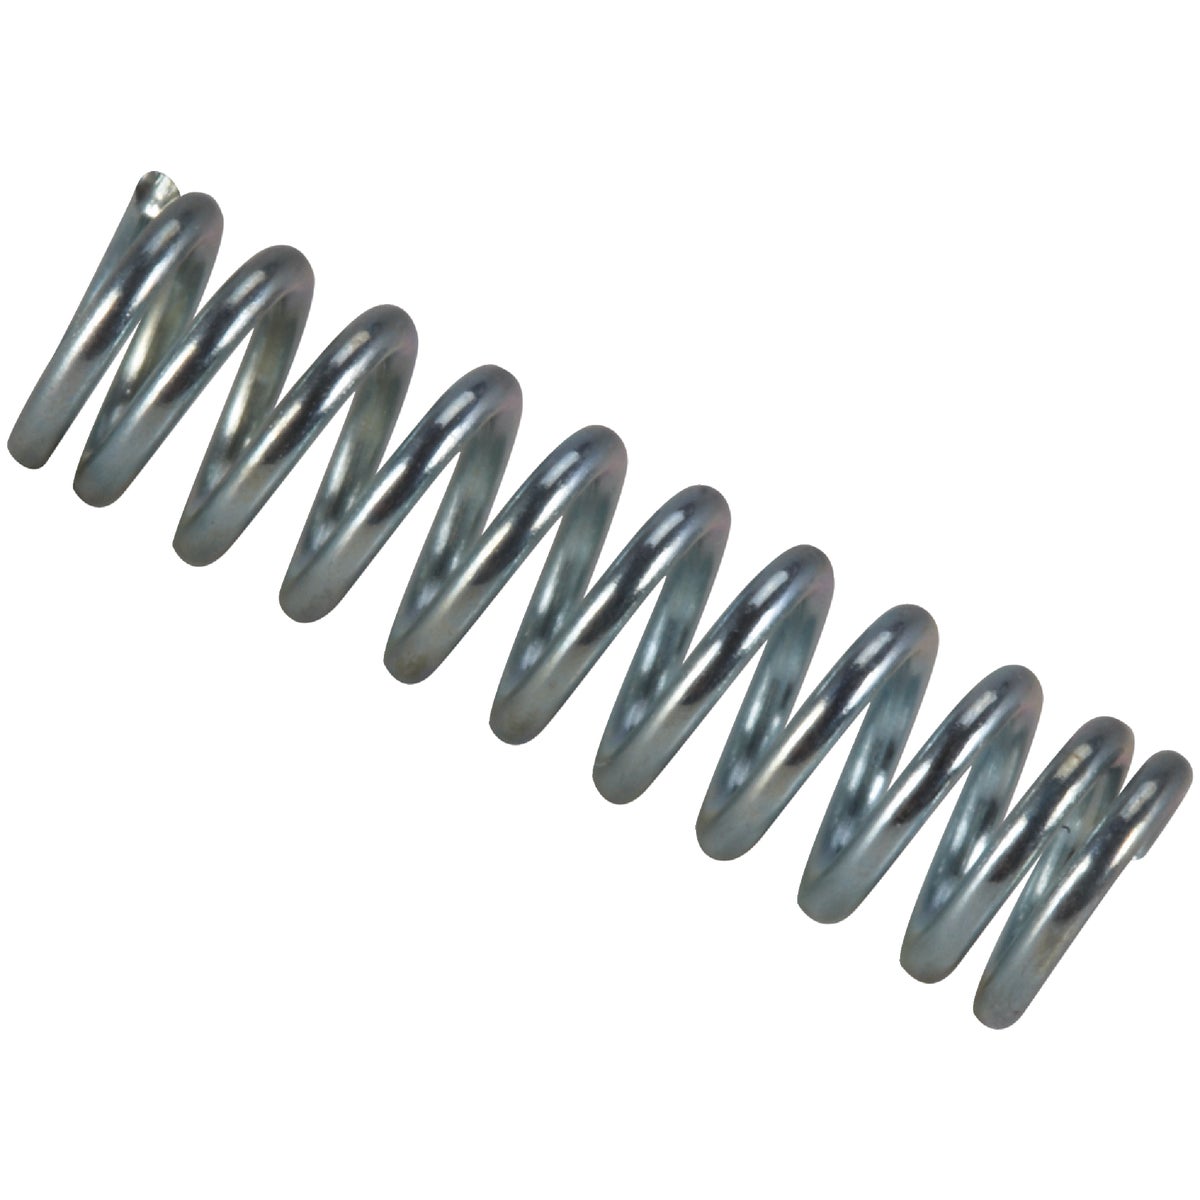 Item 749113, Open-coil helical spring contains the highest potential energy when the 